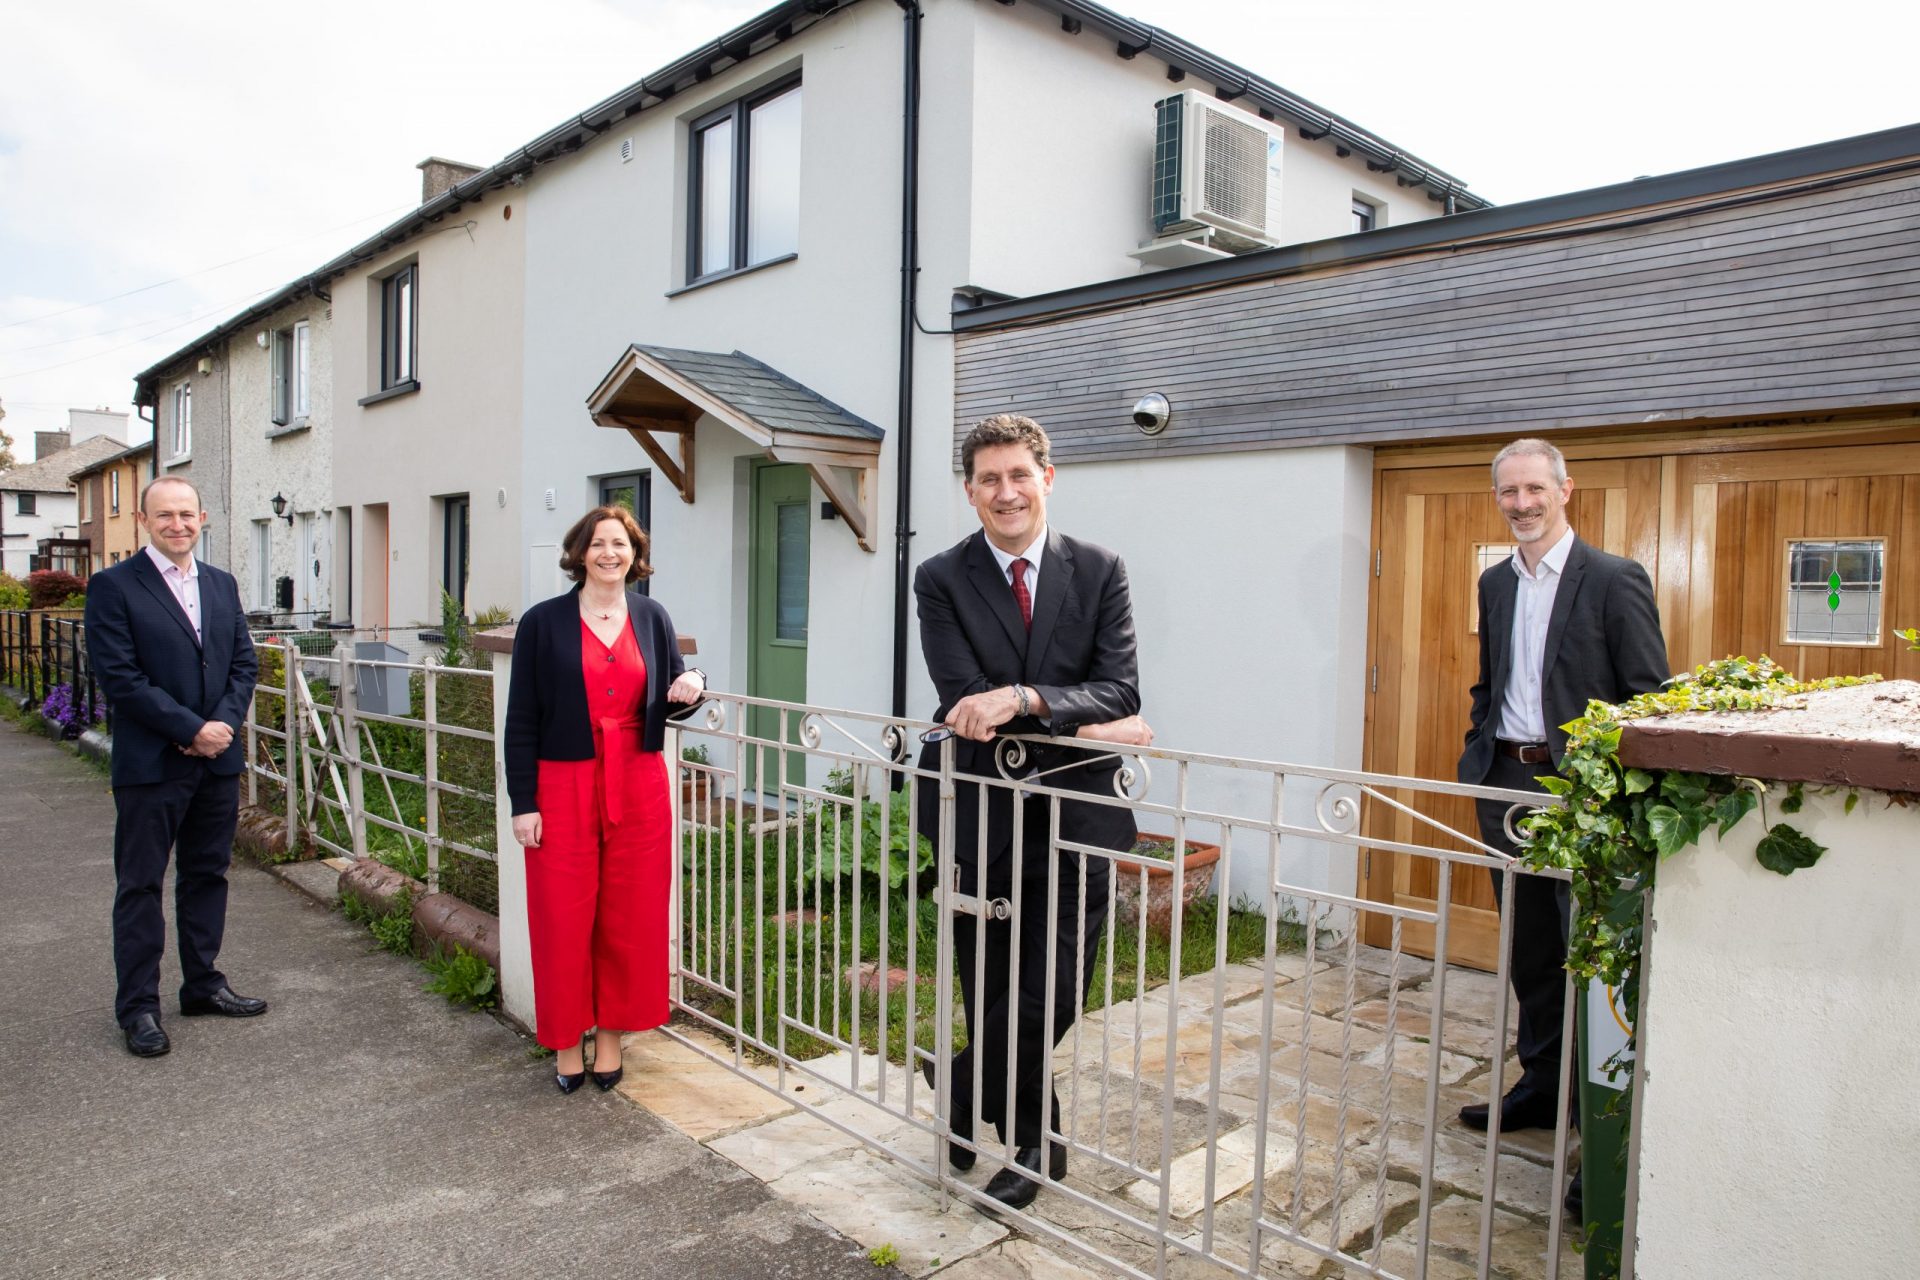 Electric Ireland and Tipperary Energy Agency announce landmark home retrofit joint venture